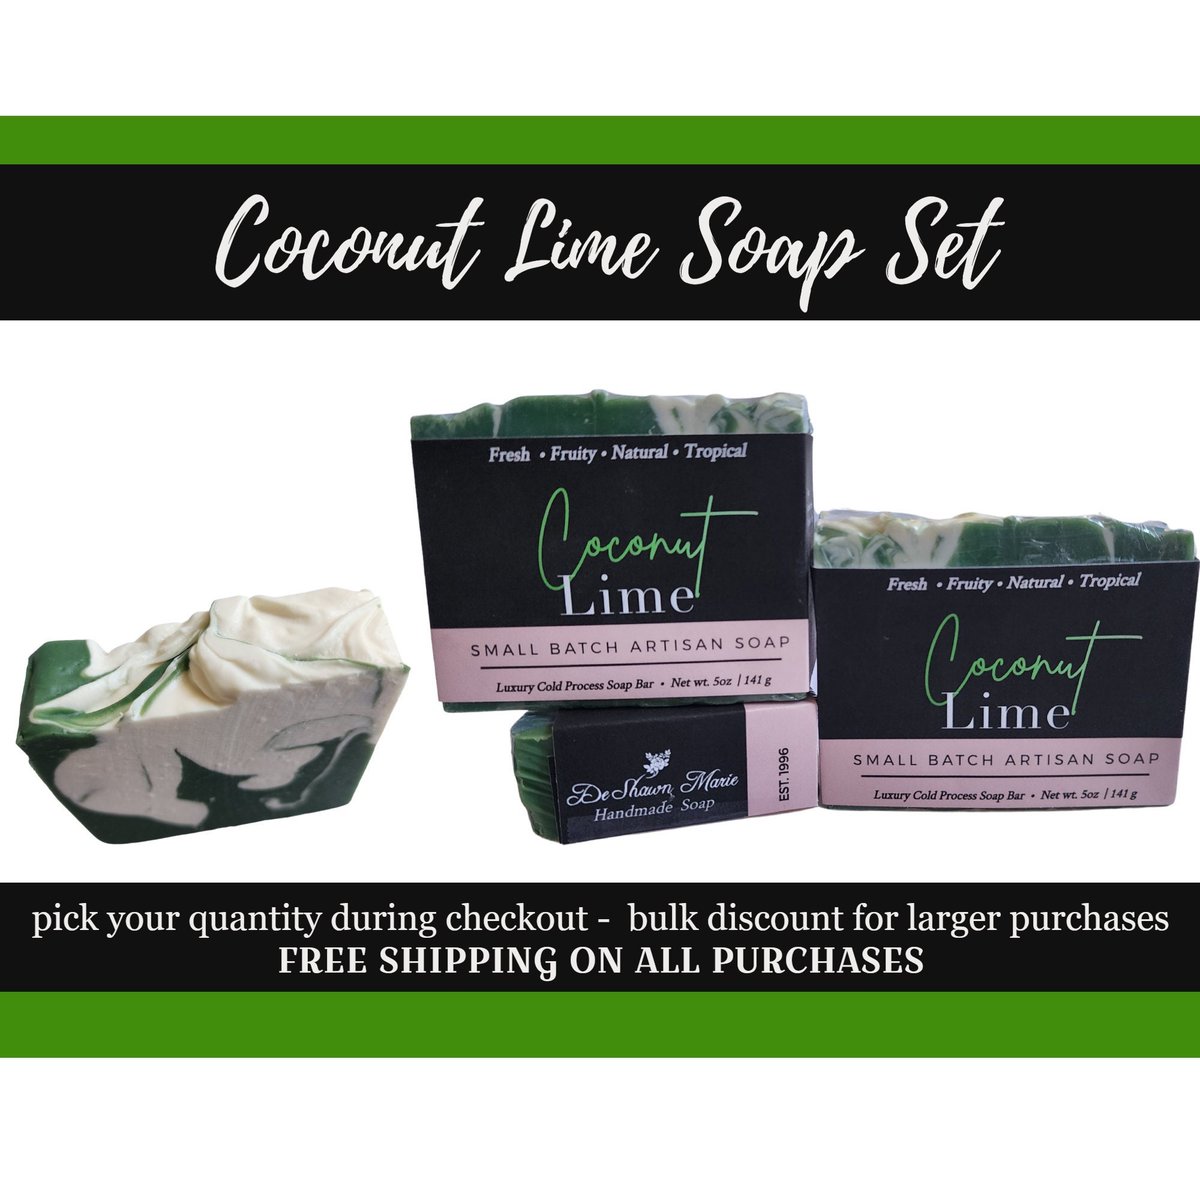 Soap Set Coconut Soap, Lime Soap, Coconut Lime Soap, Vegan Soap, Natural Soap, Cold Process Soap, Soap Gift, Bath and Body Gift, tuppu.net/94a0fbd5 #gifts #soap #Soapgift #DeShawnMarie #shopsmall #vegan #Etsy #selfcare #Christmasgifts #SoapSet